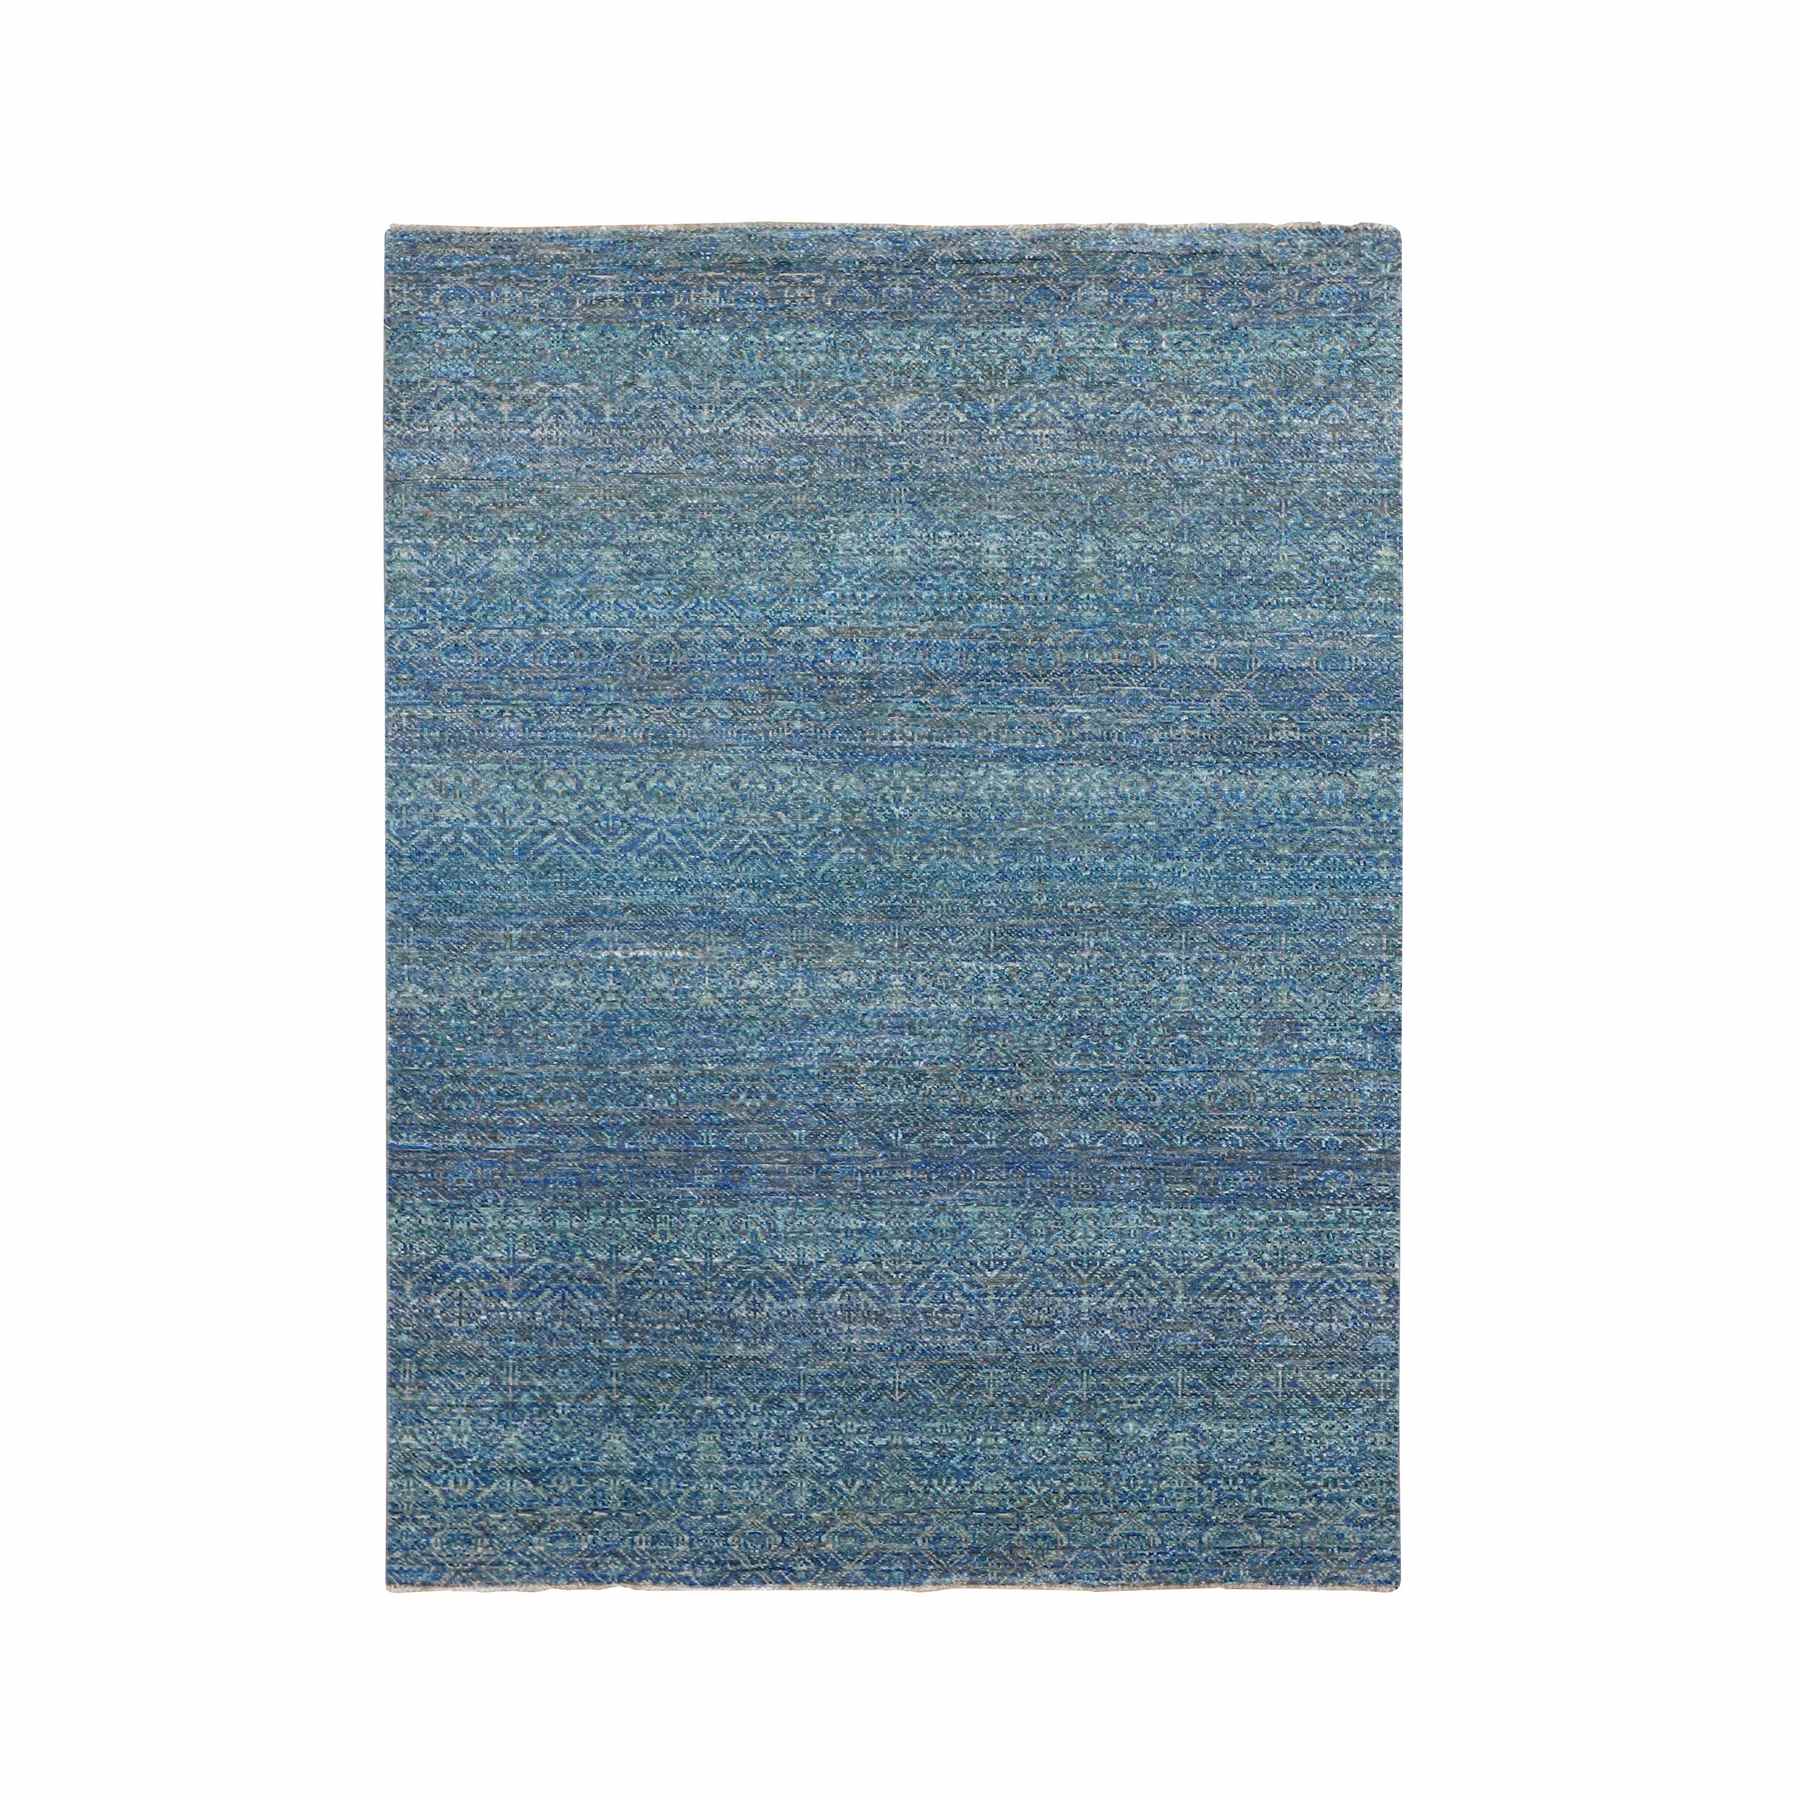 XL Rug Pad (for 8x11, 9x12, 10x12)